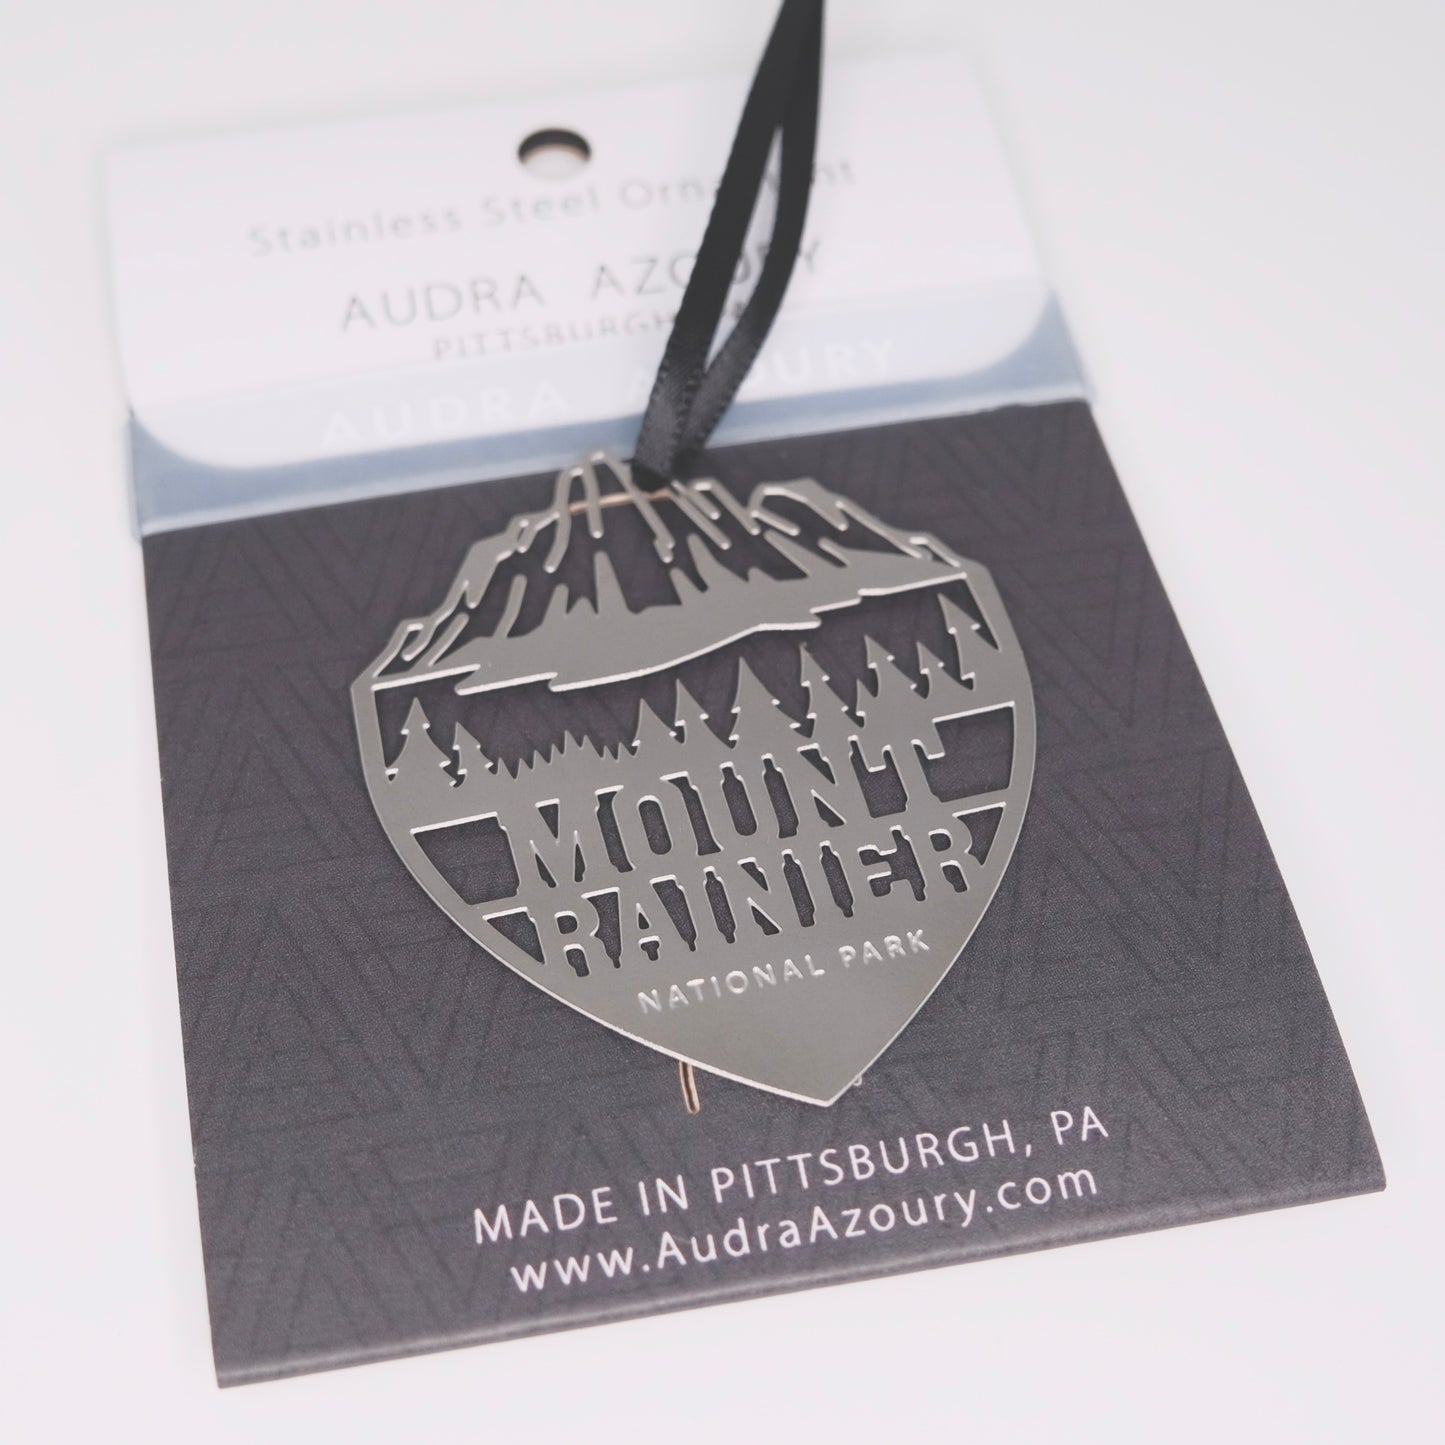 Mount Rainier National Park ornament in stainless steel by Audra Azoury